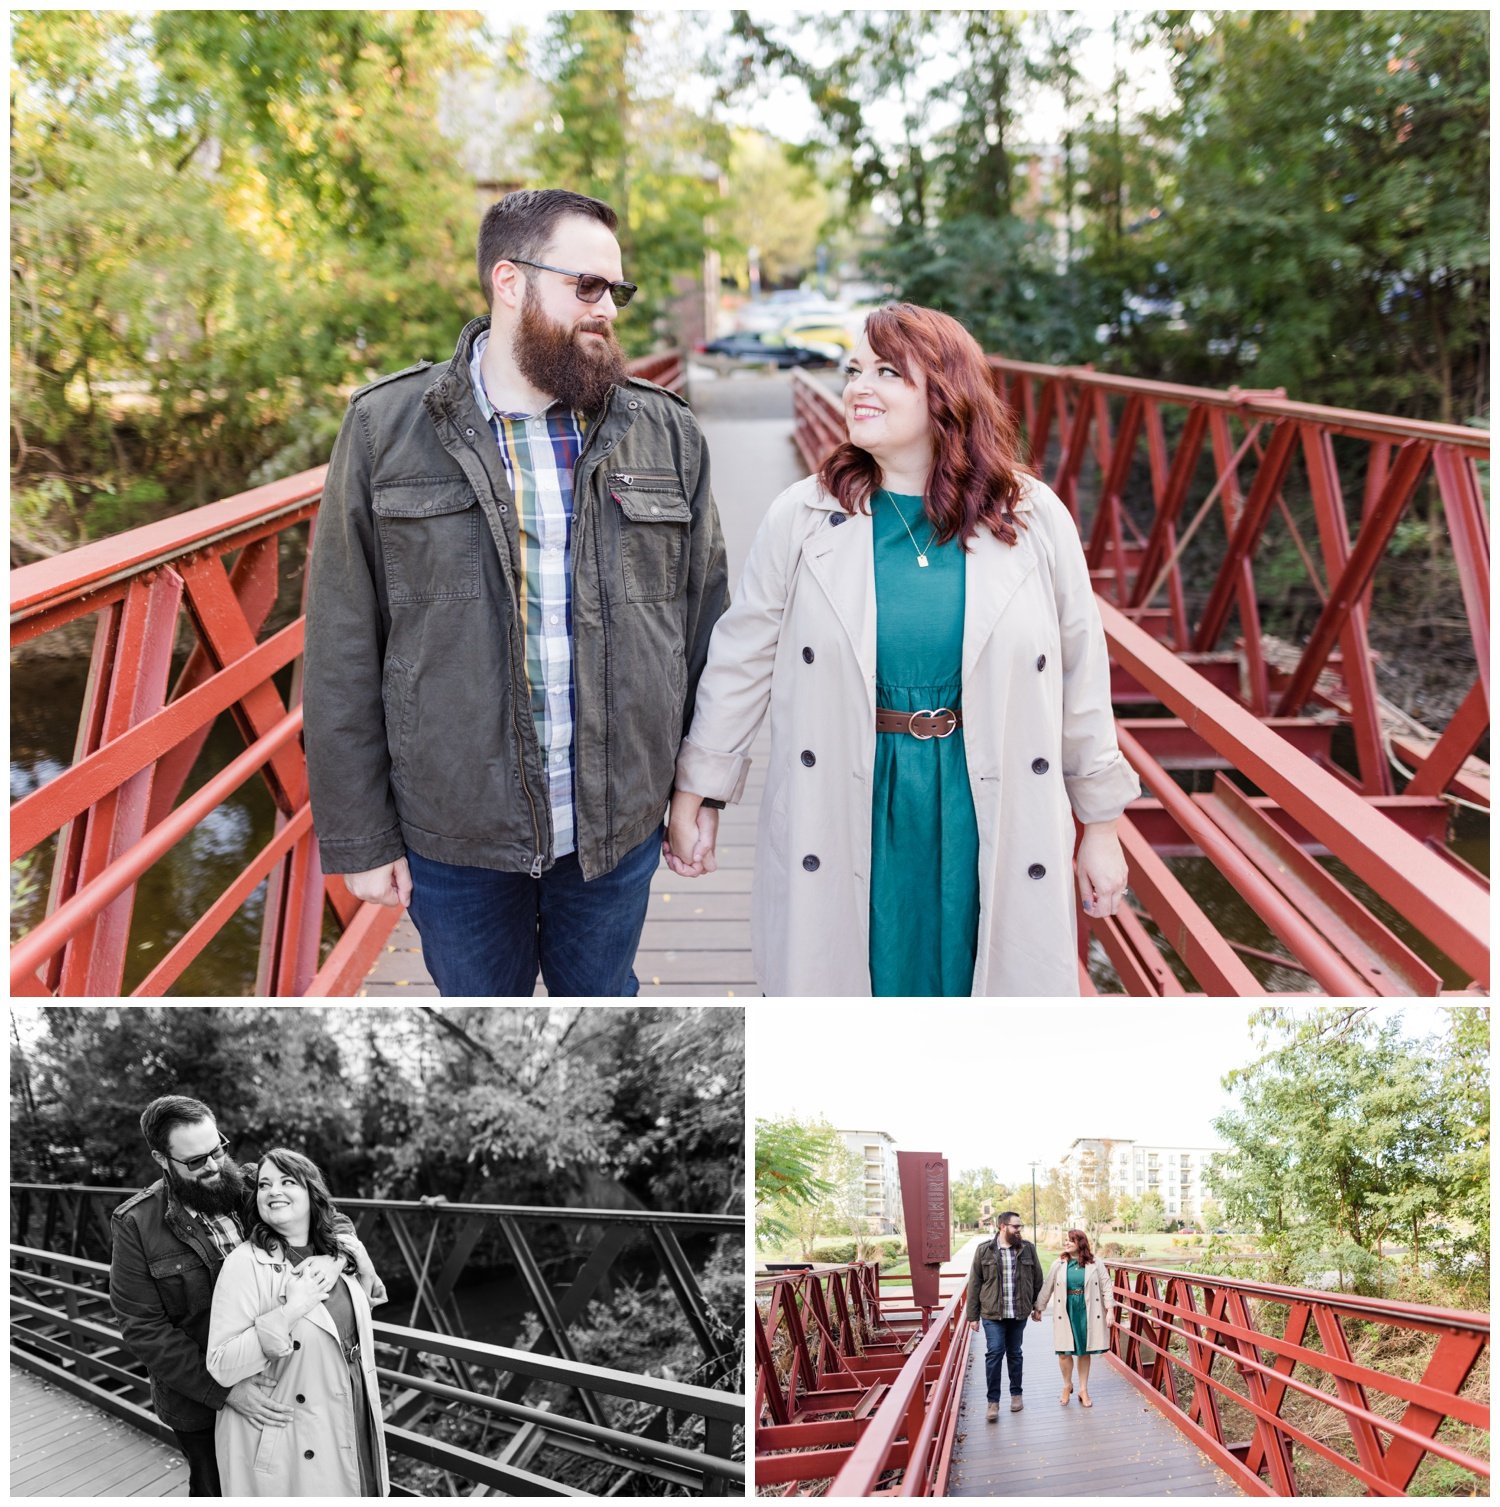 Downtown-Phoenixville-PA-Fall-Engagement-Session-with-Root-Down-Brewery-2.jpg